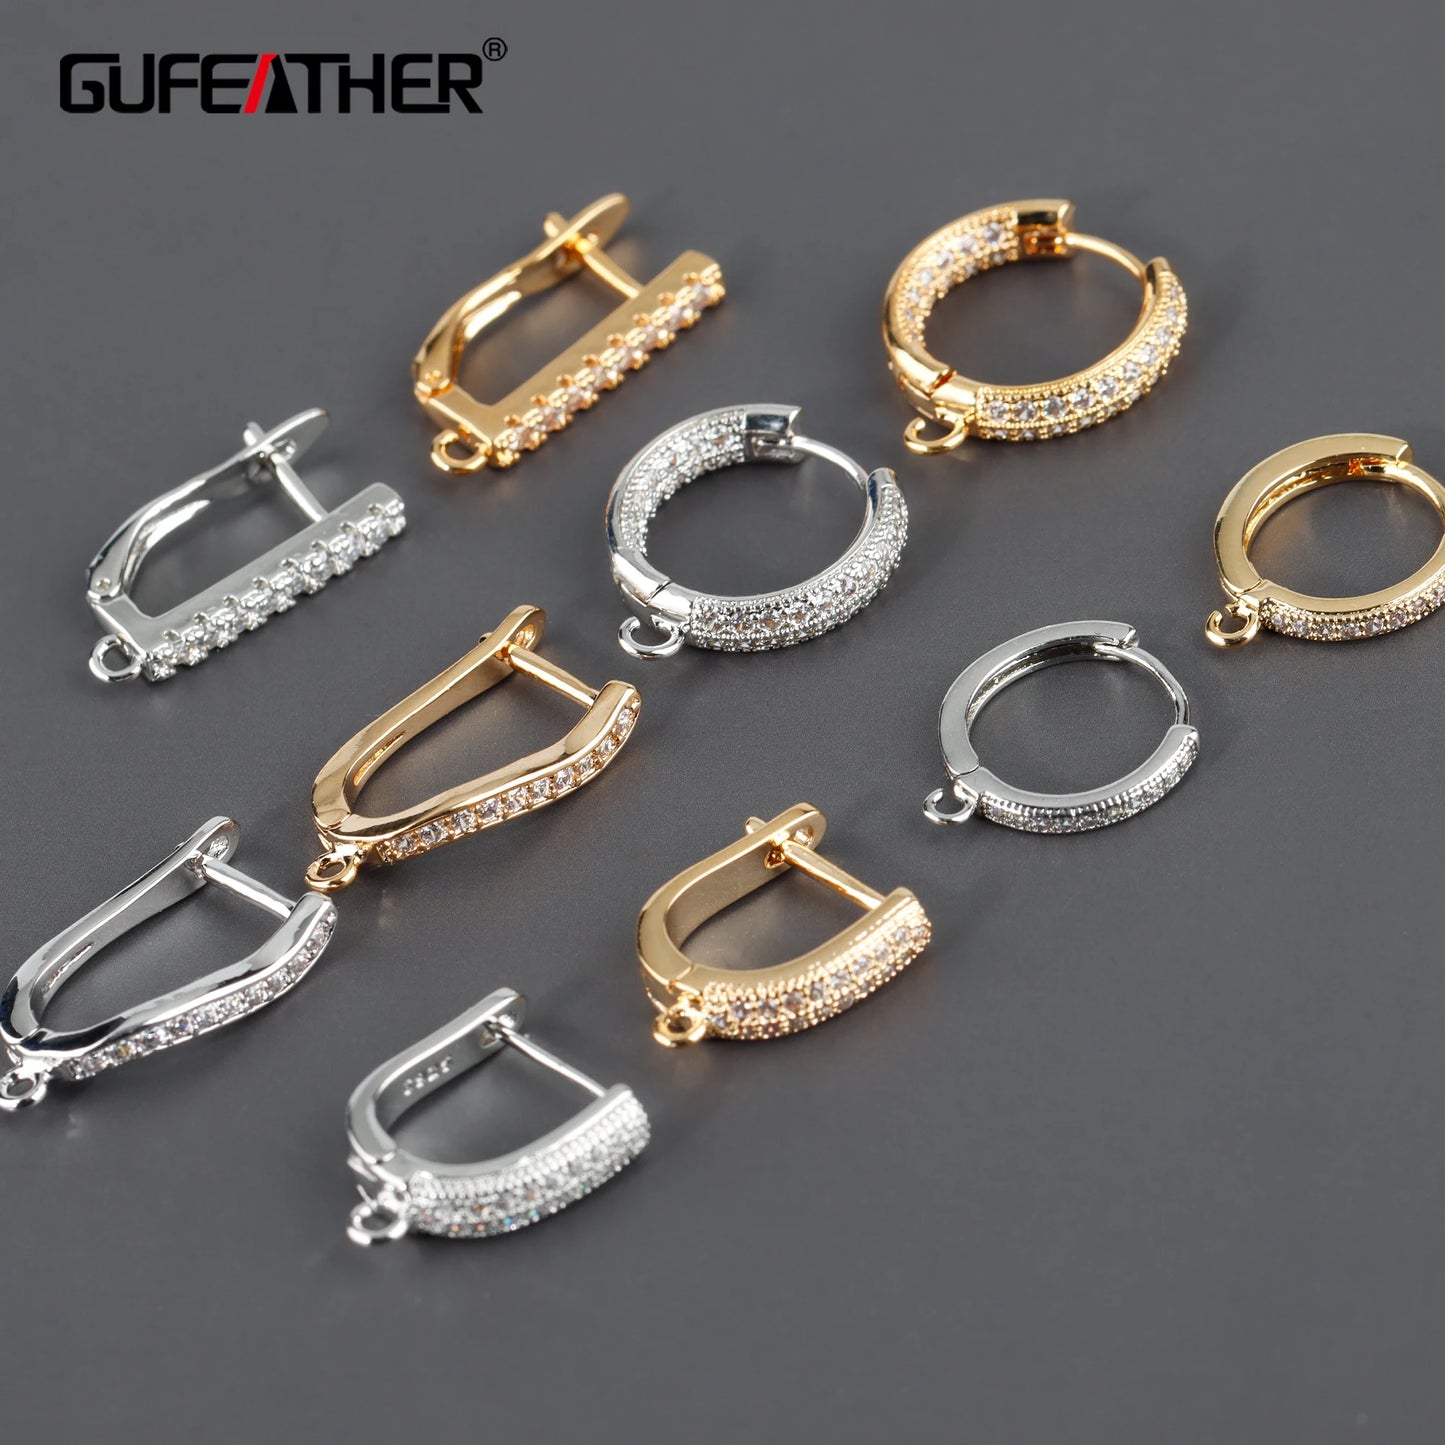 GUFEATHER M806,jewelry accessories,pass REACH,nickel free,18k gold rhodium plated,copper,clasp hooks,jewelry making,10pcs/lot